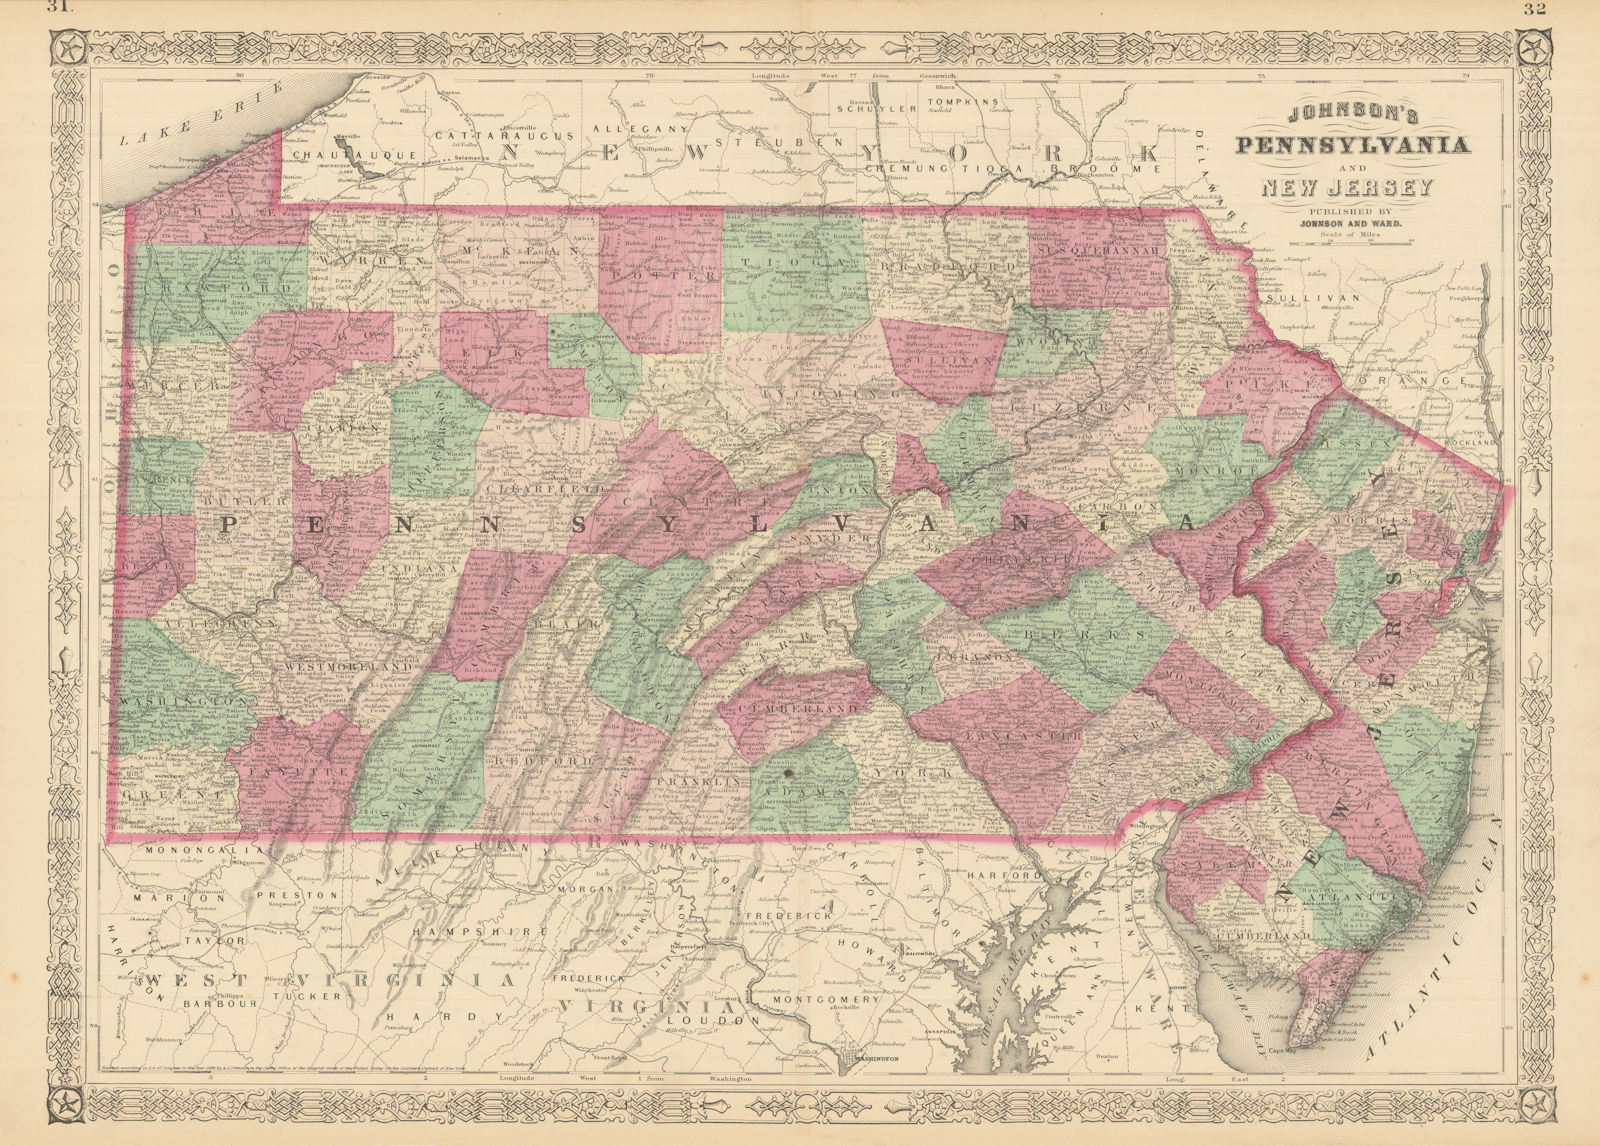 Johnson's Pennsylvania and New Jersey. US state map showing counties 1866